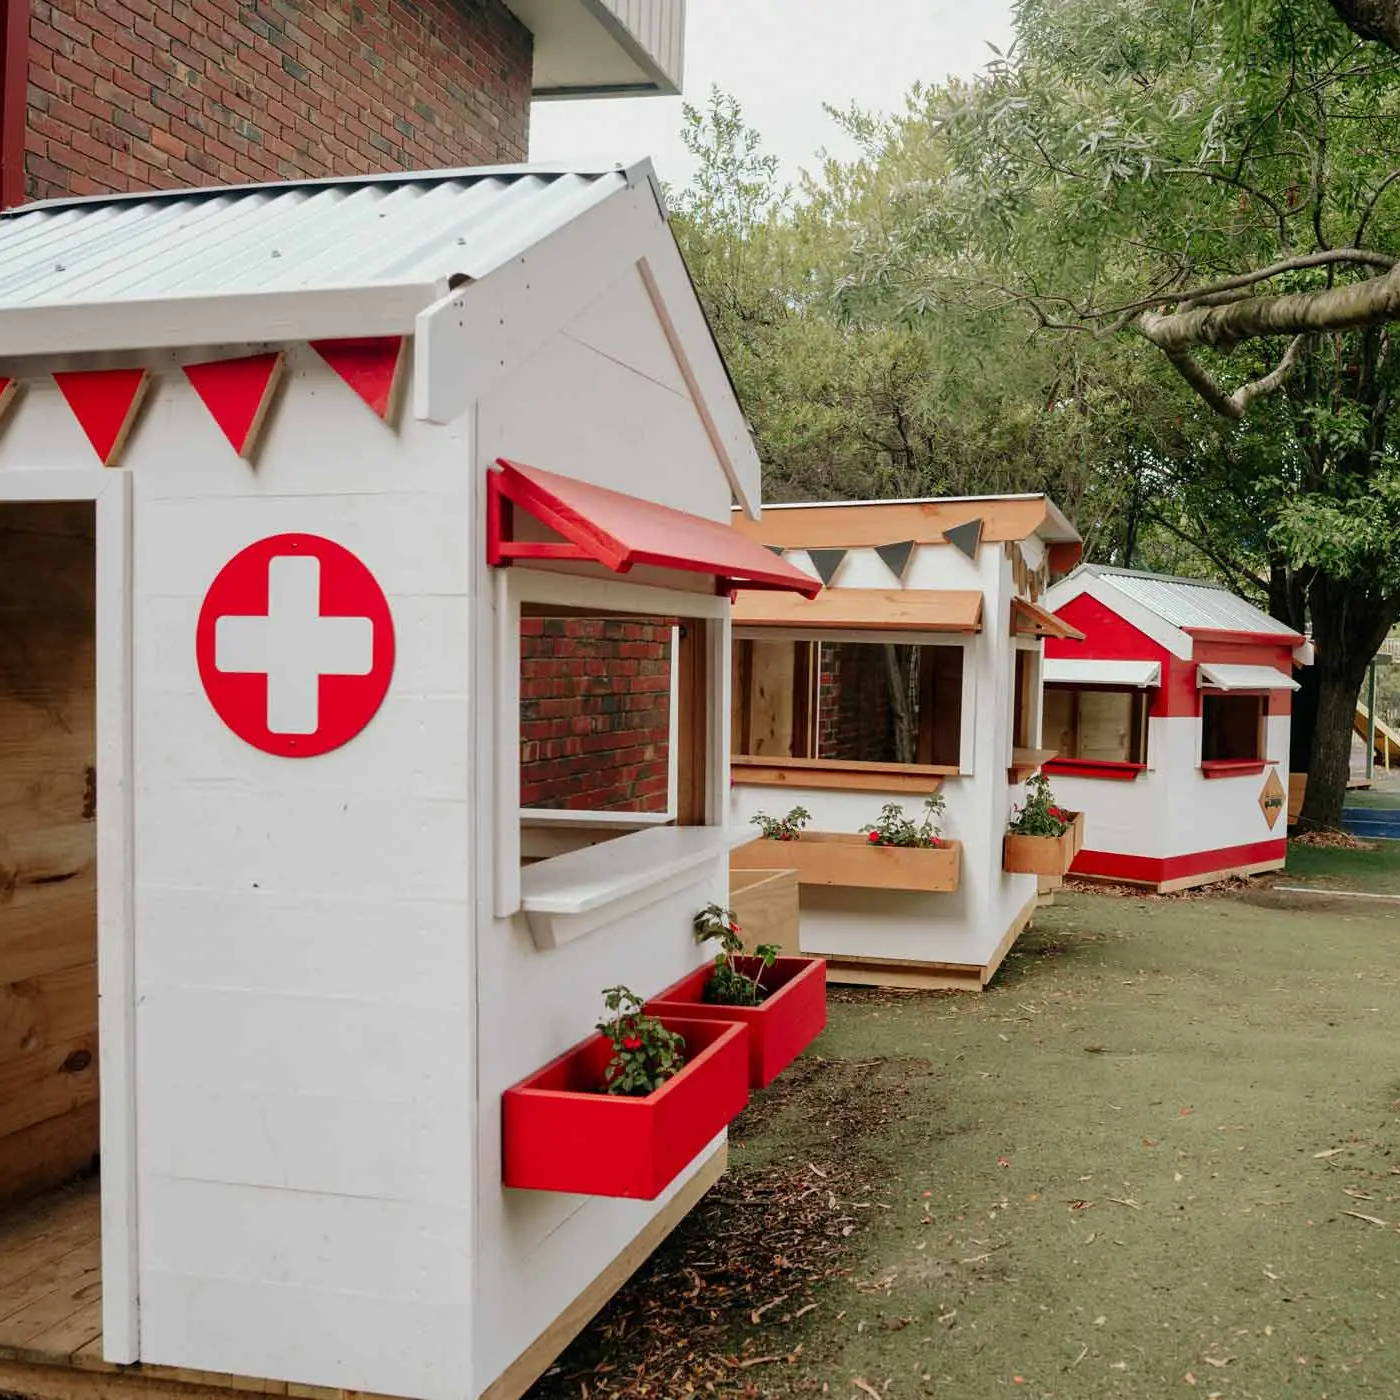 Cubby houses are installed to transit kindergarten to primary school